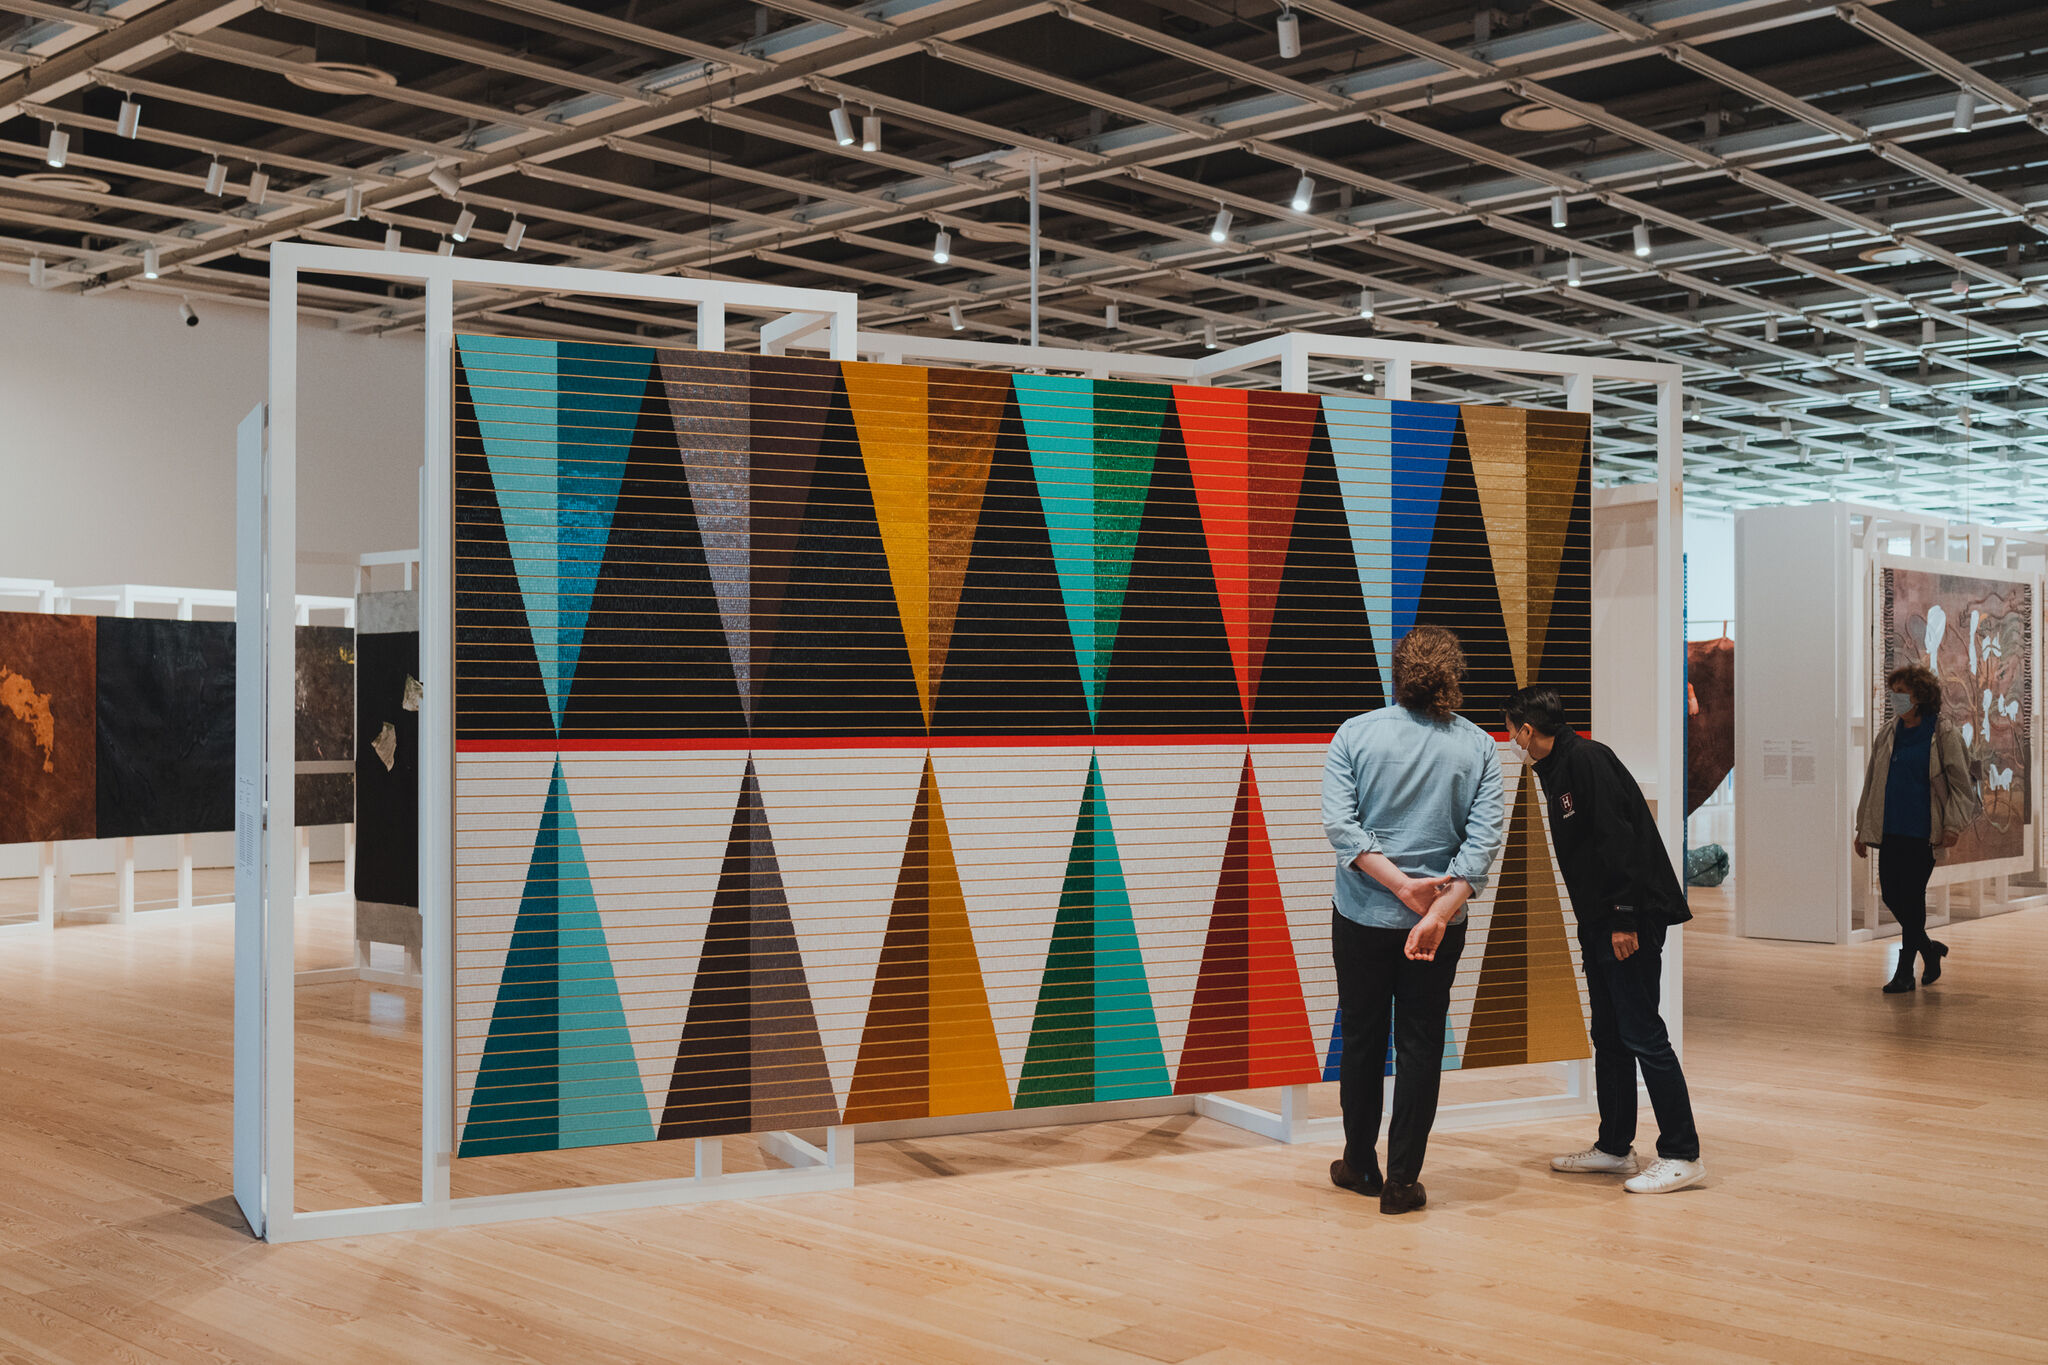 Three visitors walk through an open gallery space and inspect works of art, including a large canvas of a colorful triangle pattern.